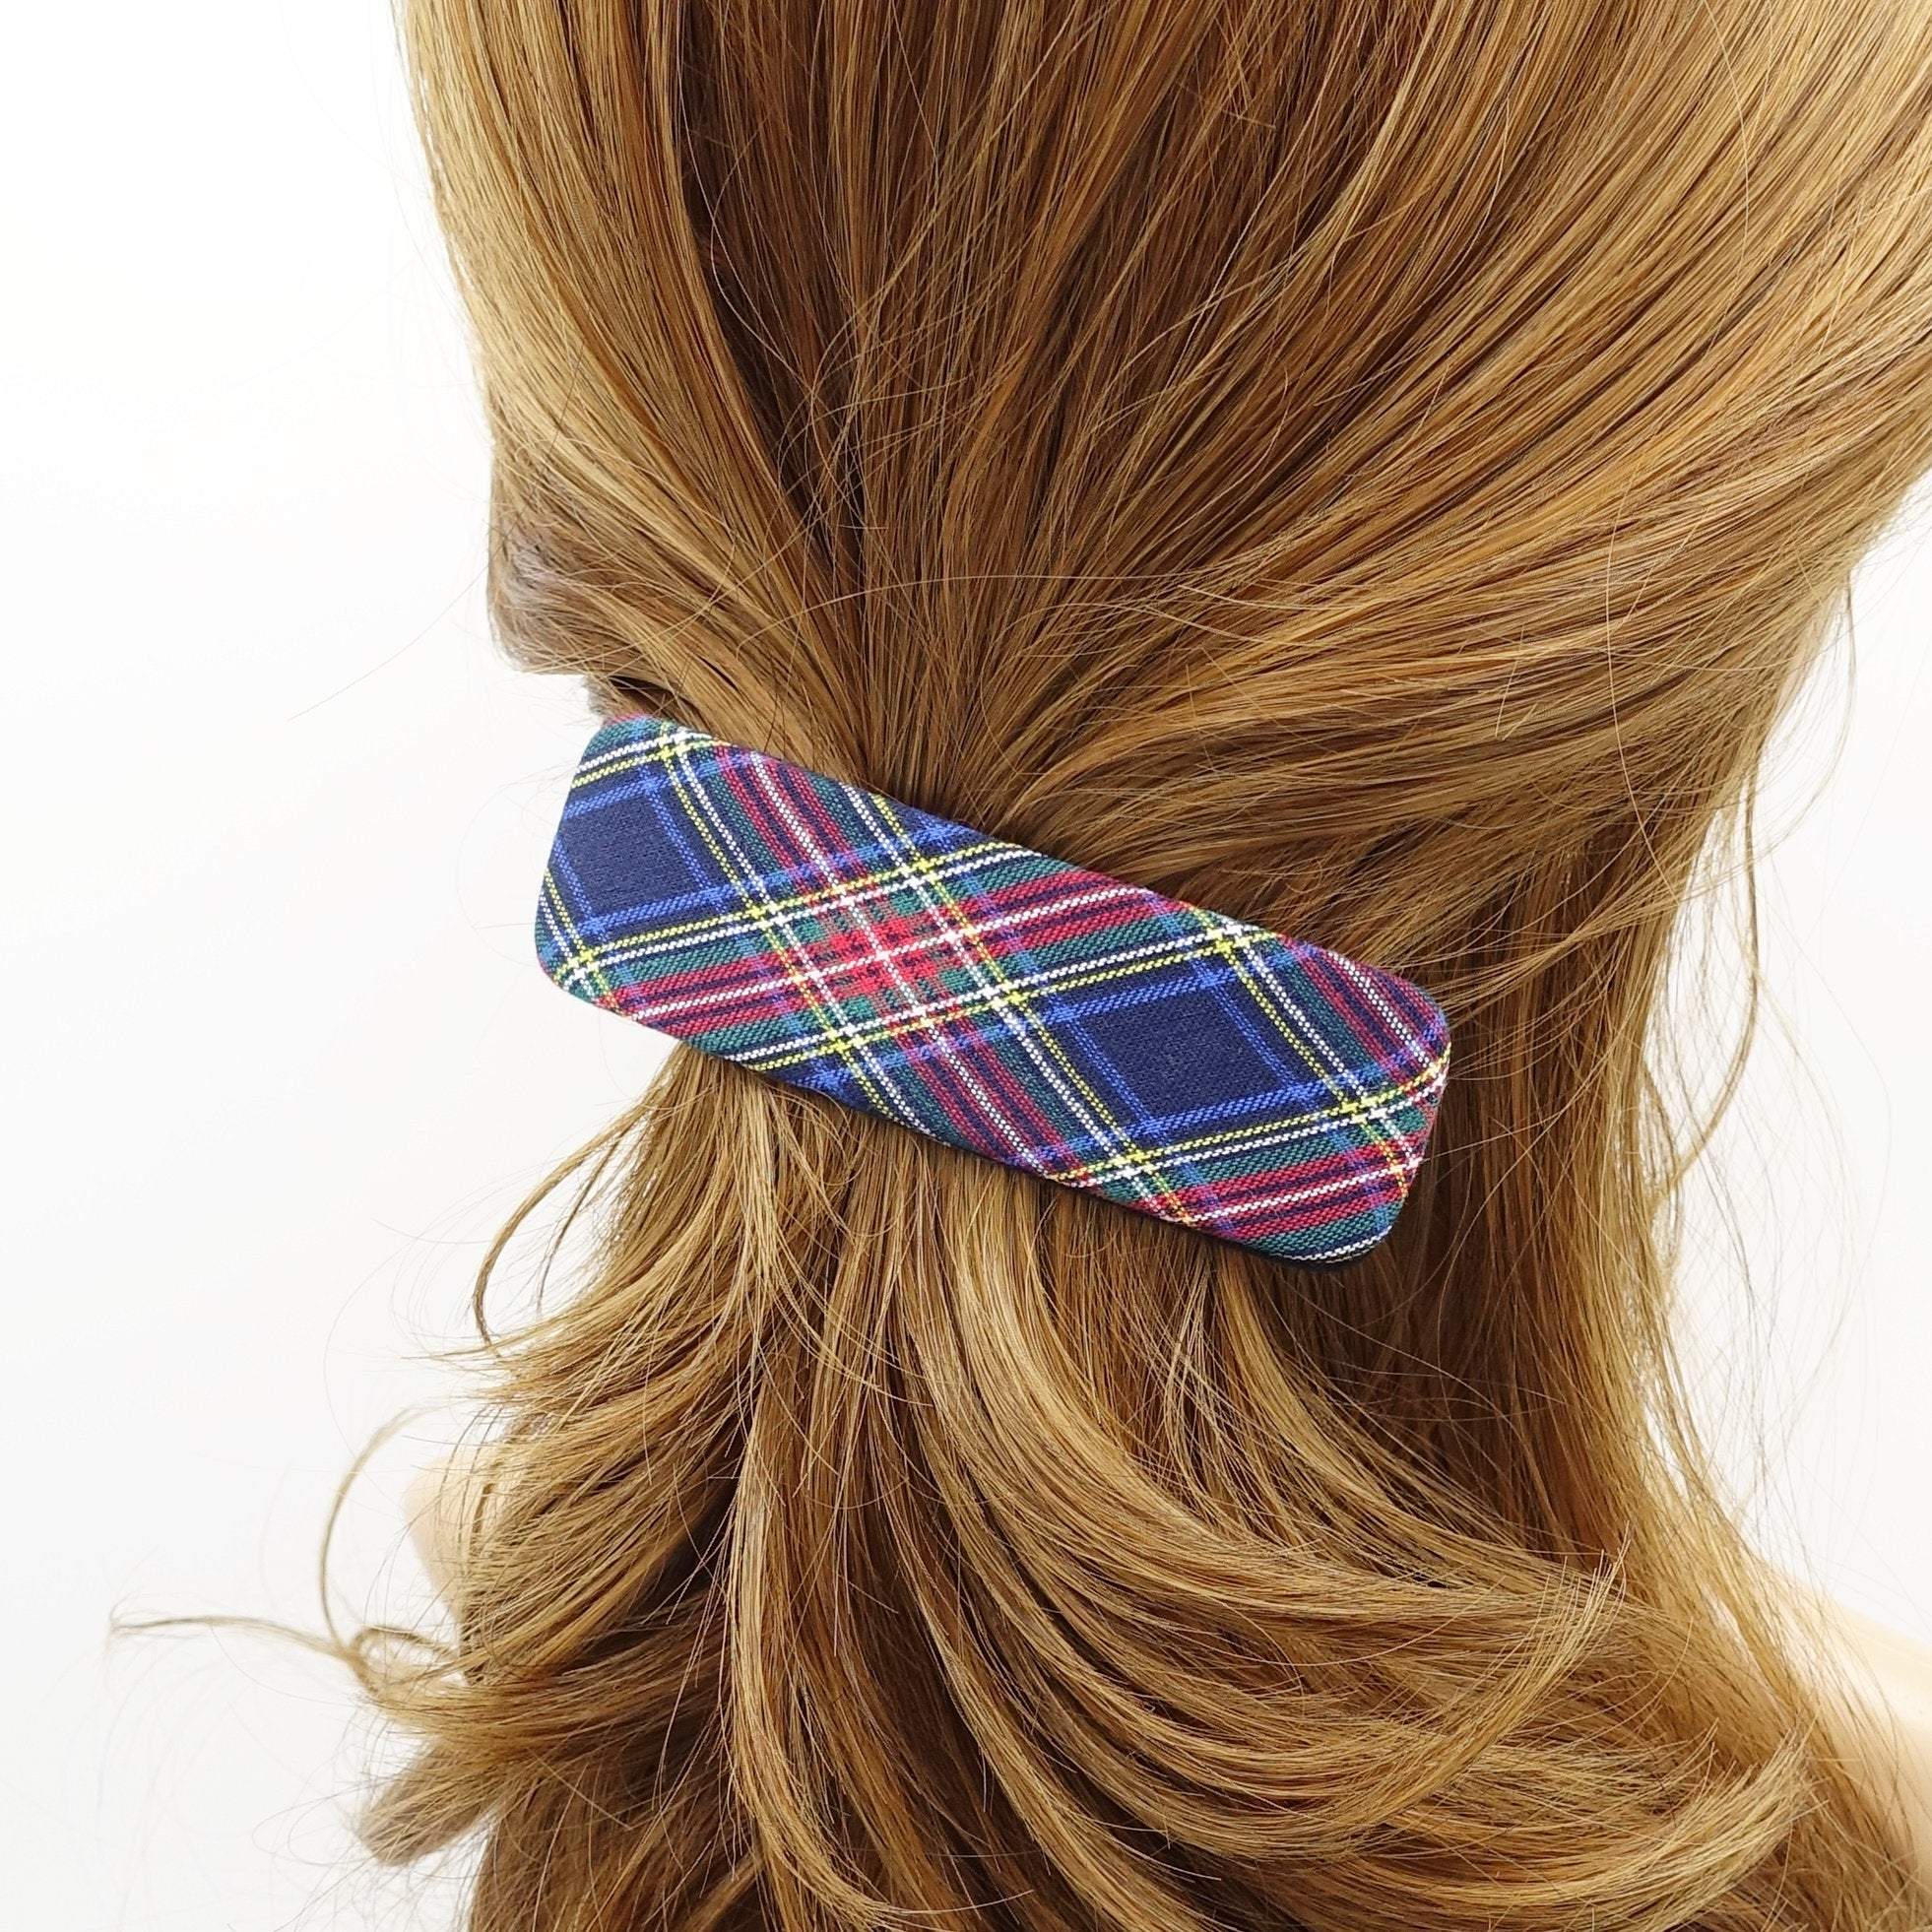 VeryShine claw/banana/barrette Navy plaid check barrette rectangle hair accessory for women